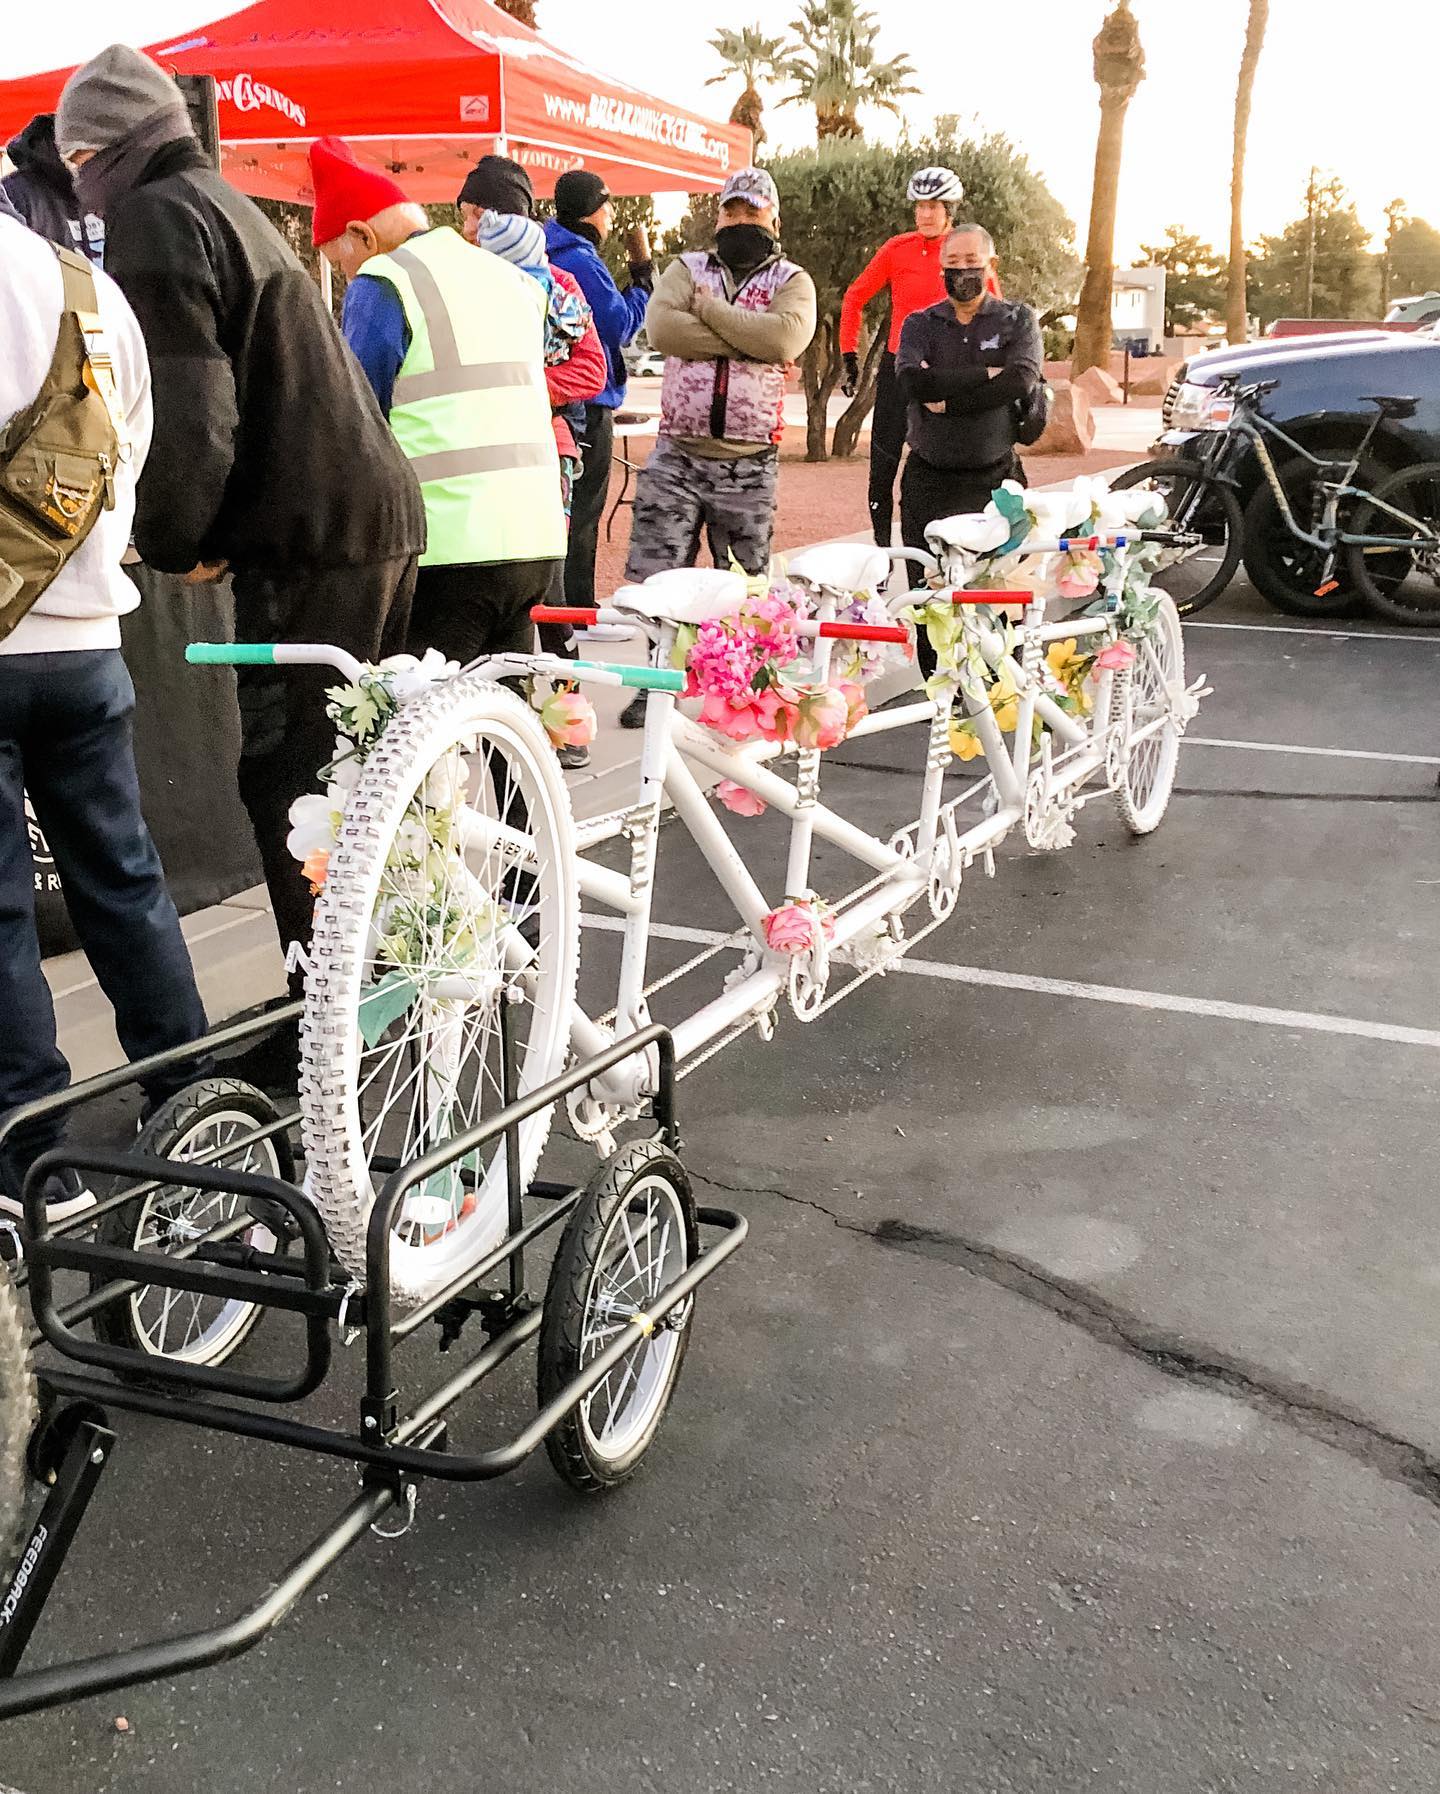 On Saturday, @snvbc organized the #TEAMG Memorial Ride with Metro PD Support Vehicles for the 5 mile course. It was a chilly morning (34°F / 1°C) but that didn’t stop over 300 riders from participating. It was both a memorial and a celebration of the 5 cyclists’ lives along with raising awareness on the road. 🏽 Thanks to SNVBC, Metro PD, @saveredrock , the sponsors, and others involved that continue to advocate for cyclist safety. 🏽#nomoreghostbikes #teamg #flofactoryteam #baseperformance #ghostbikes: @chaslansadventures @sasha8716 @gbhockey9 [instagram]